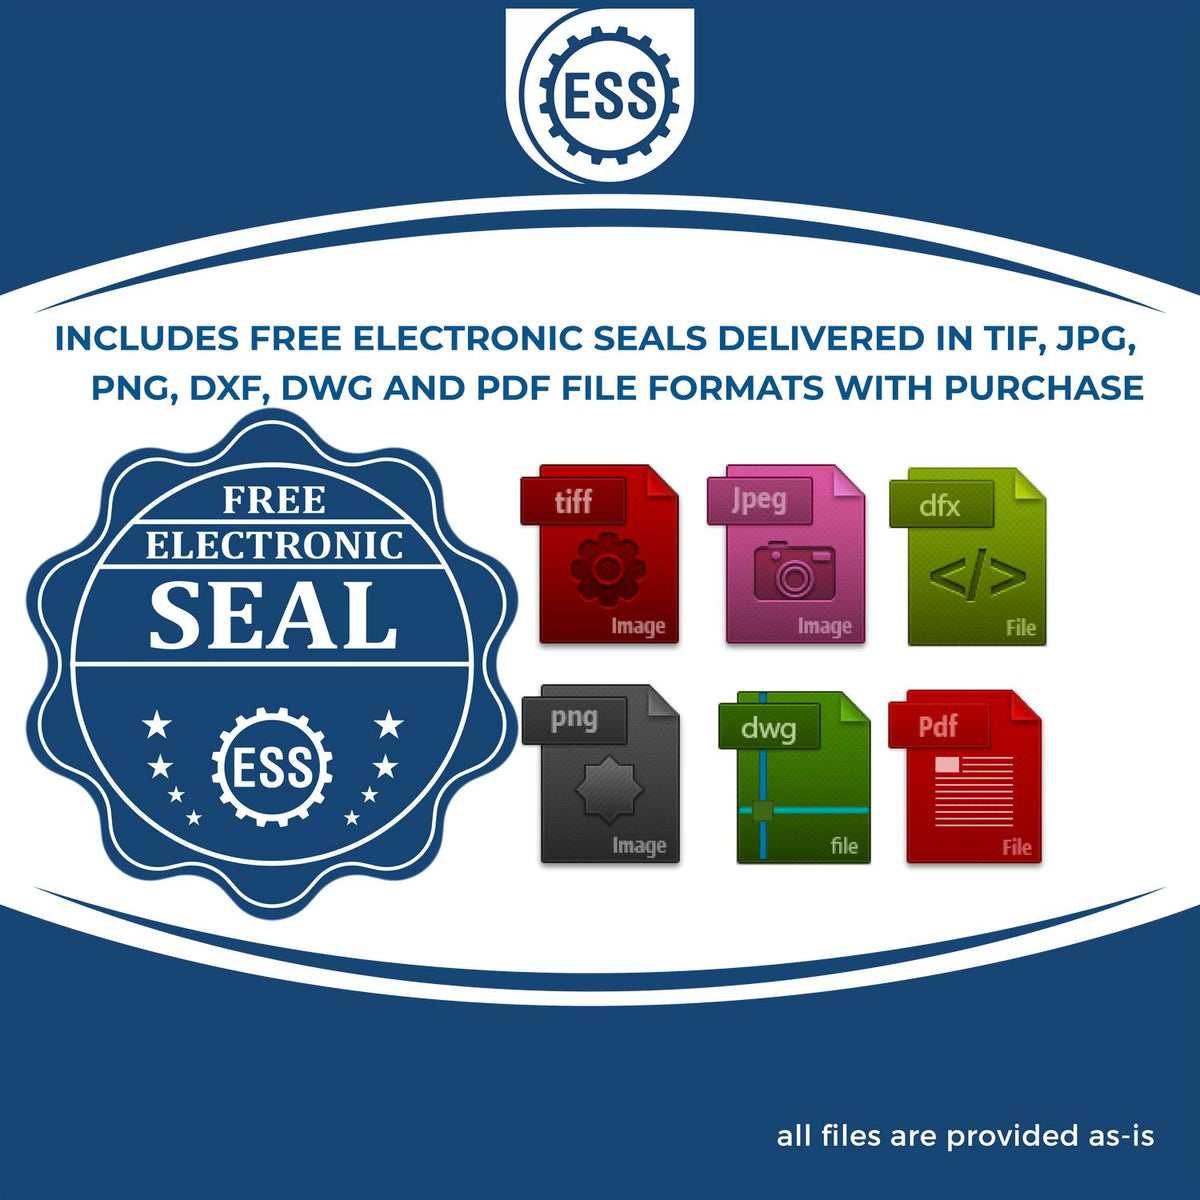 An infographic for the free electronic seal for the Slim Pre-Inked Hawaii Landscape Architect Seal Stamp illustrating the different file type icons such as DXF, DWG, TIF, JPG and PNG.